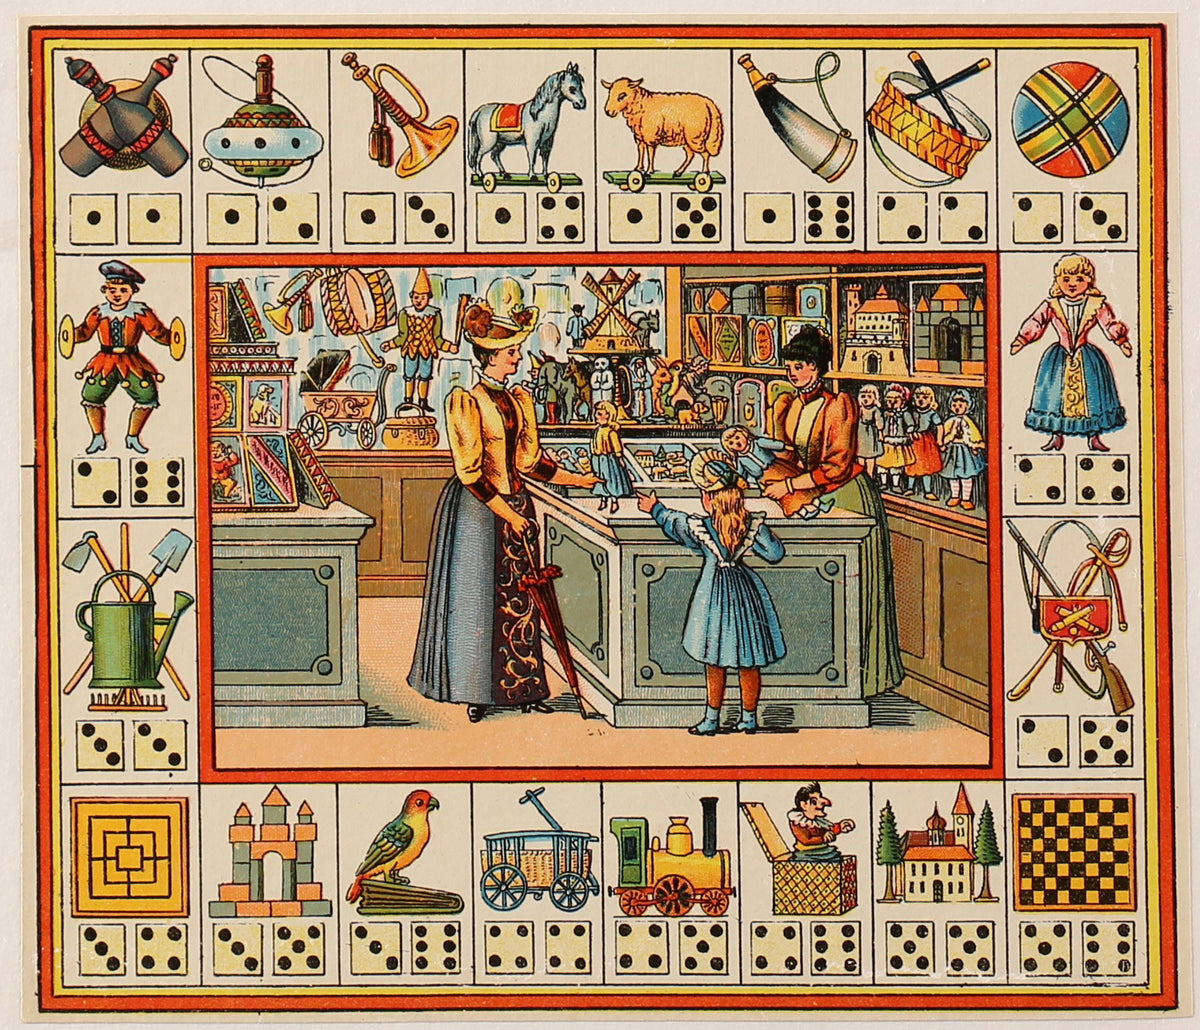 French Board Game - Jewelry &amp; Toy Stores - 1900s - Authentic Vintage Antique Print